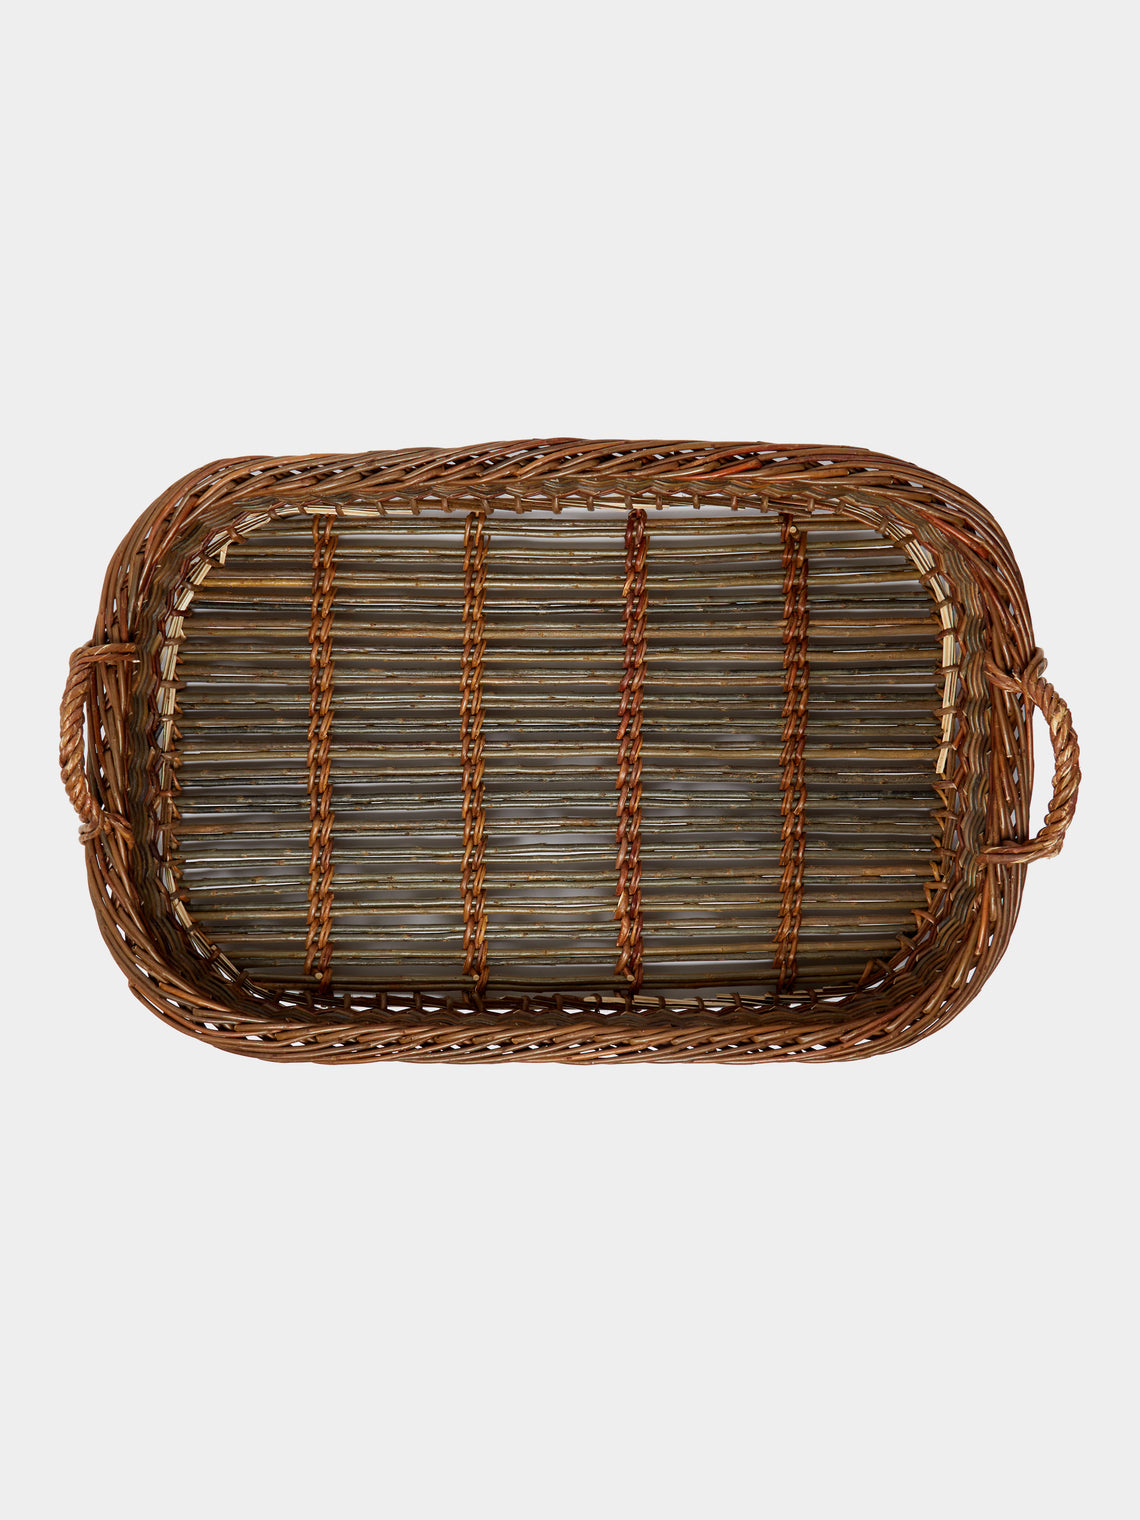 Benjamin Nauleau - Handwoven Willow Large Oval Tray -  - ABASK